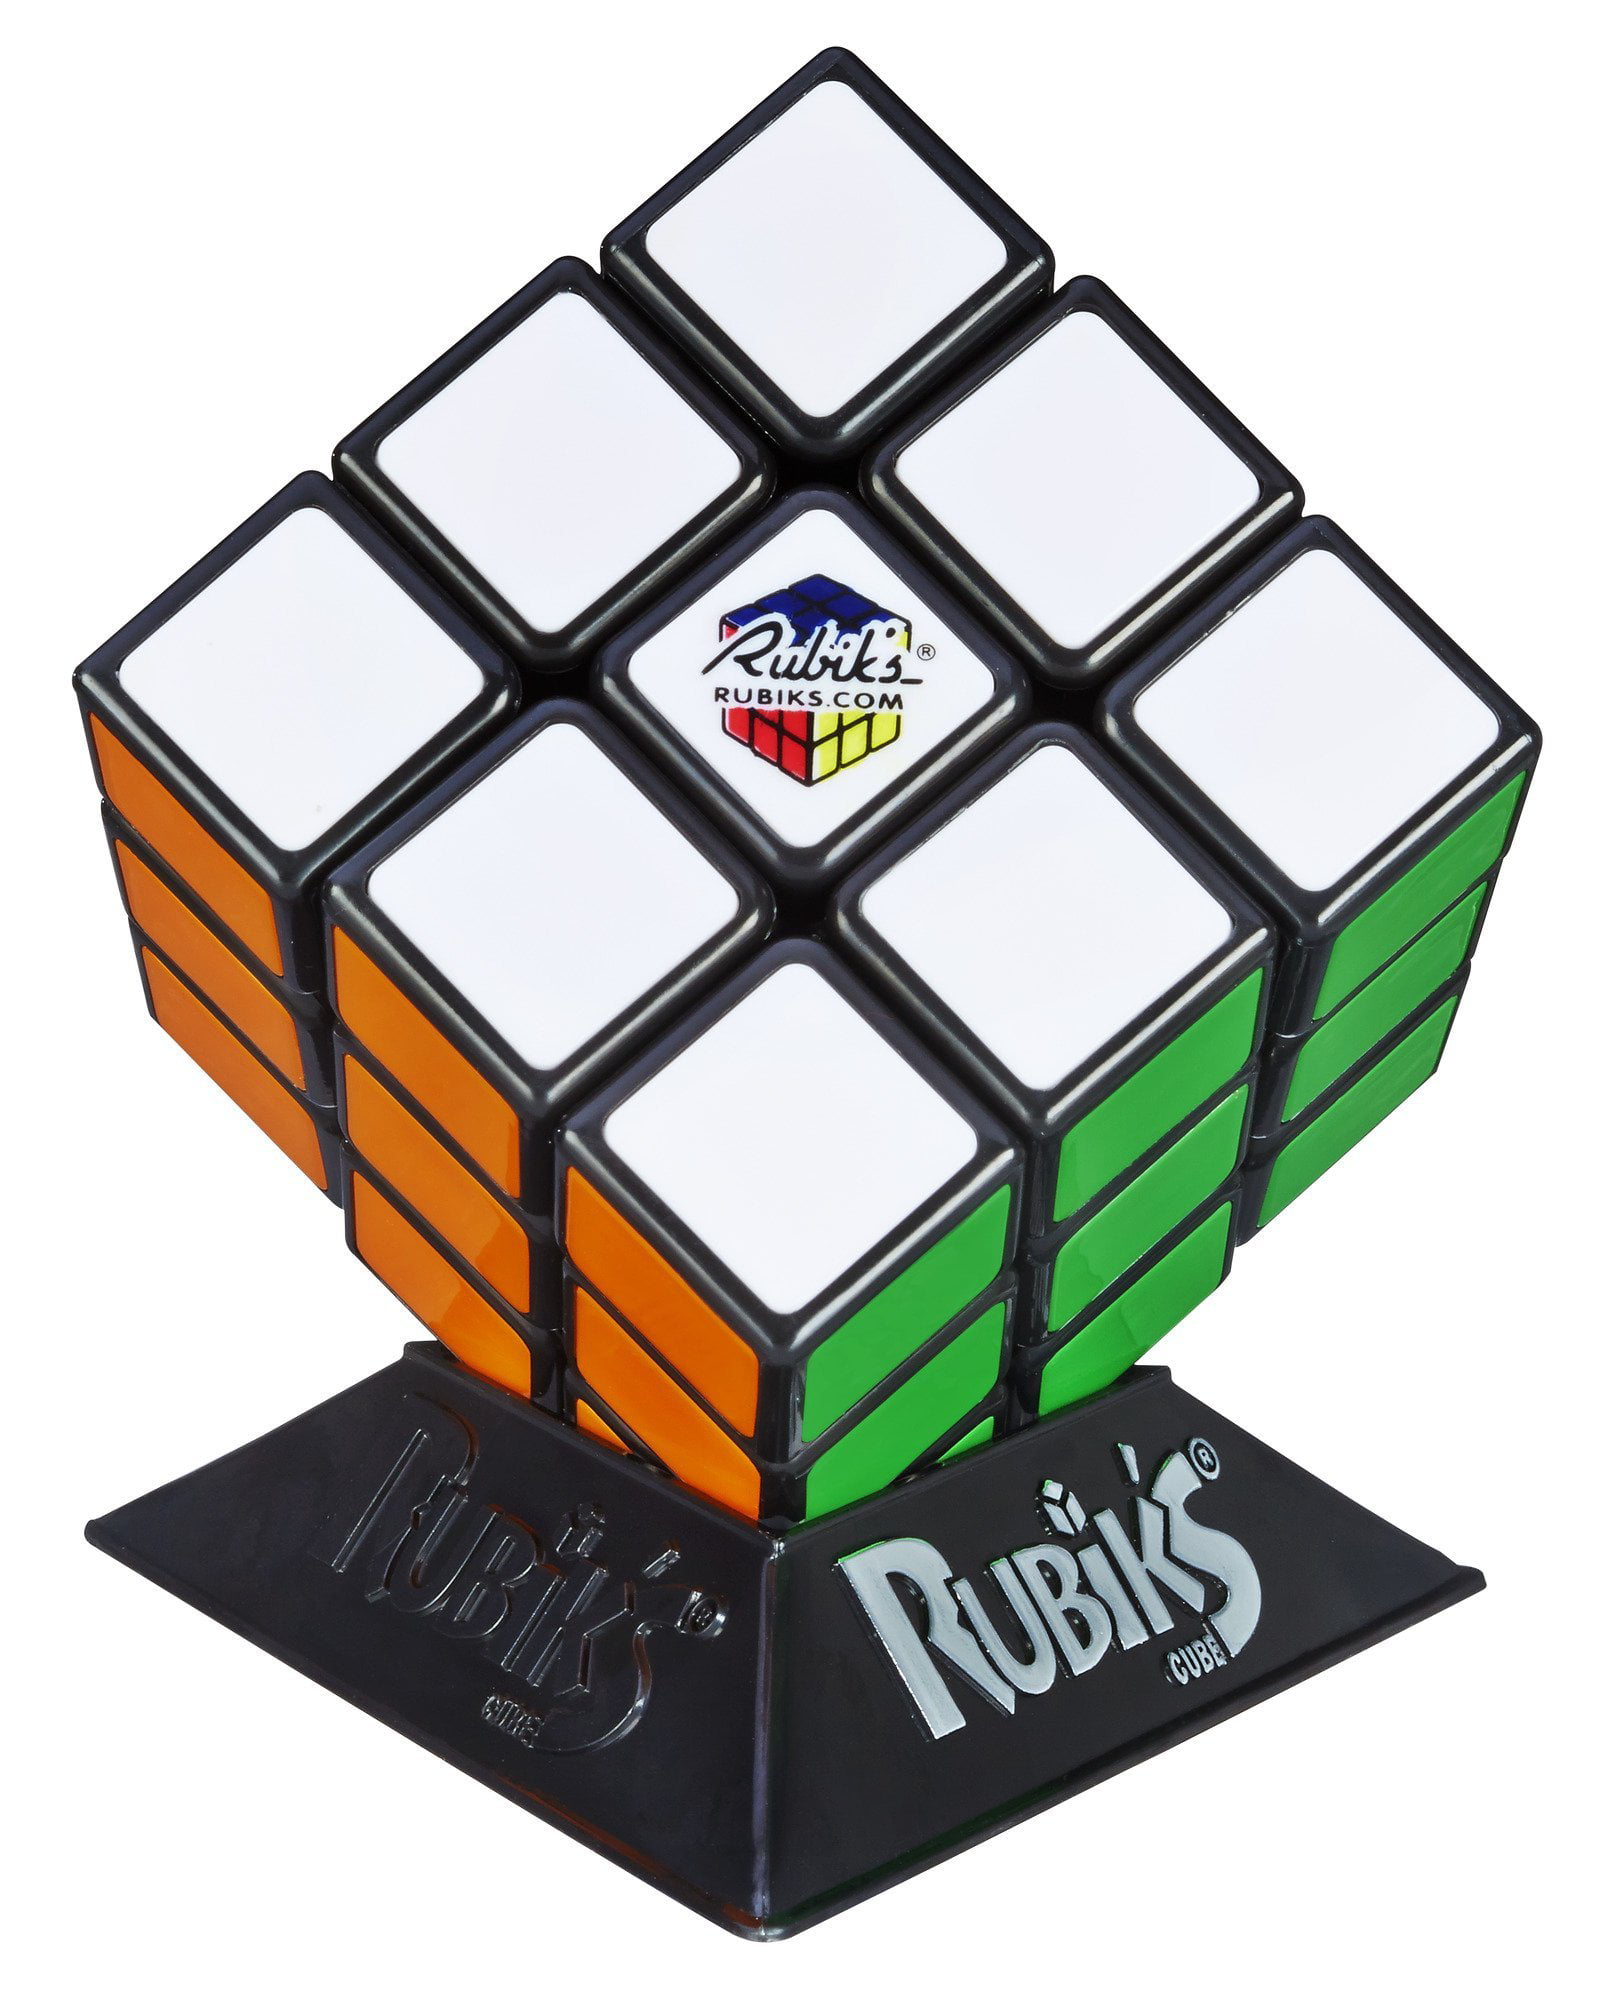 Original Rubiks Product RUBIK'S CUBE with Display Stand HASBRO Gaming A9312 